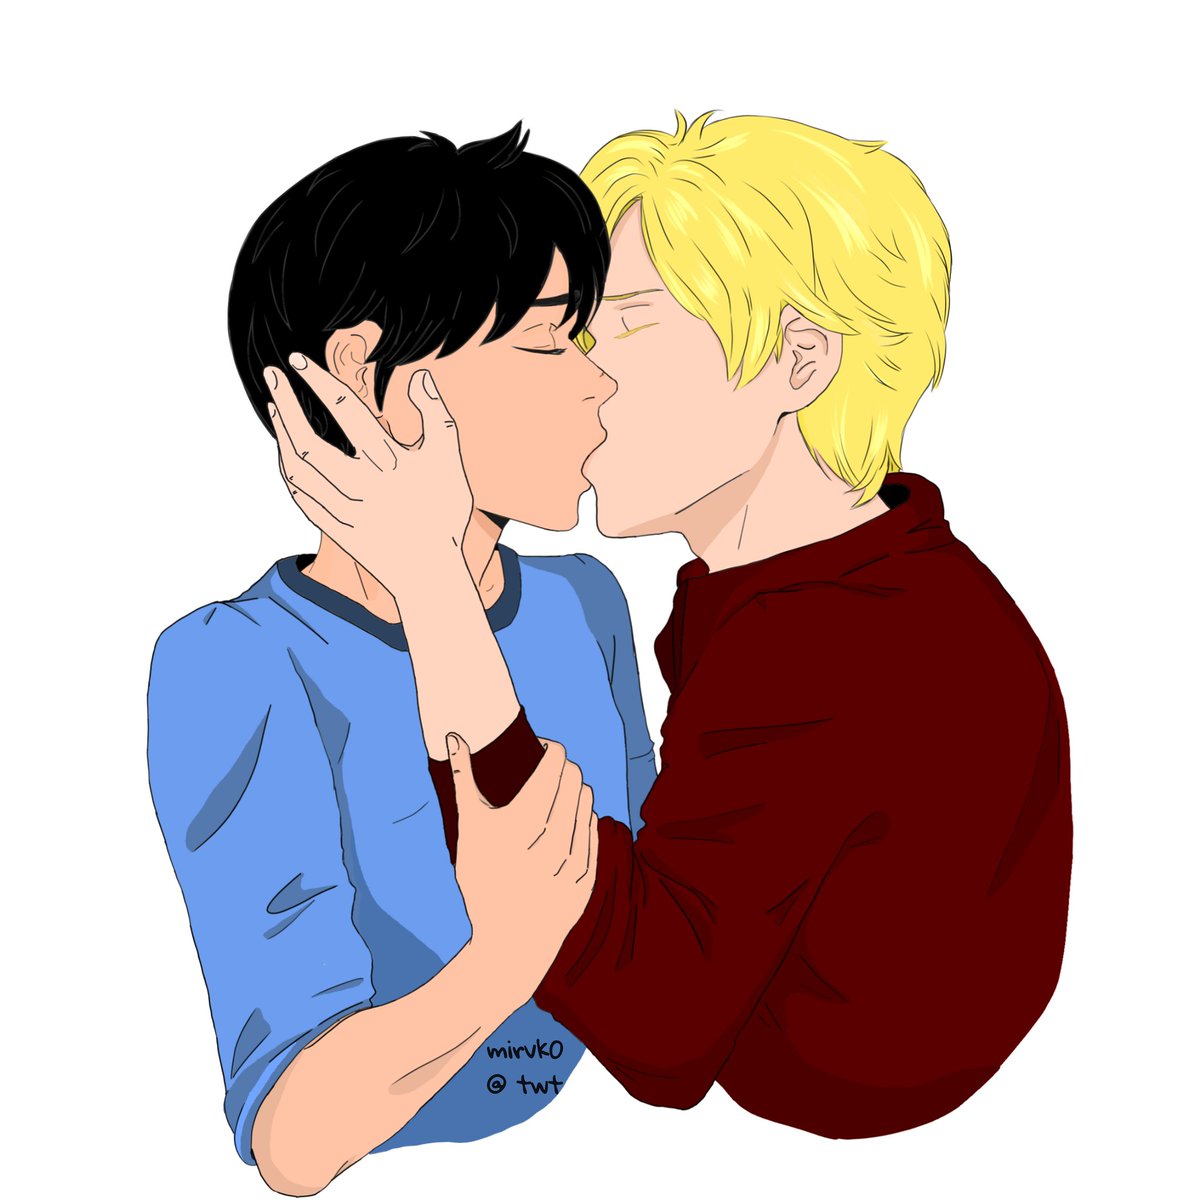 In honor of the last episode airing today, two years ago, here's #Asheiji kissing to sooth our broken hearts ❤️
#BANANAFISH #A英 #バナナフィッシュ 